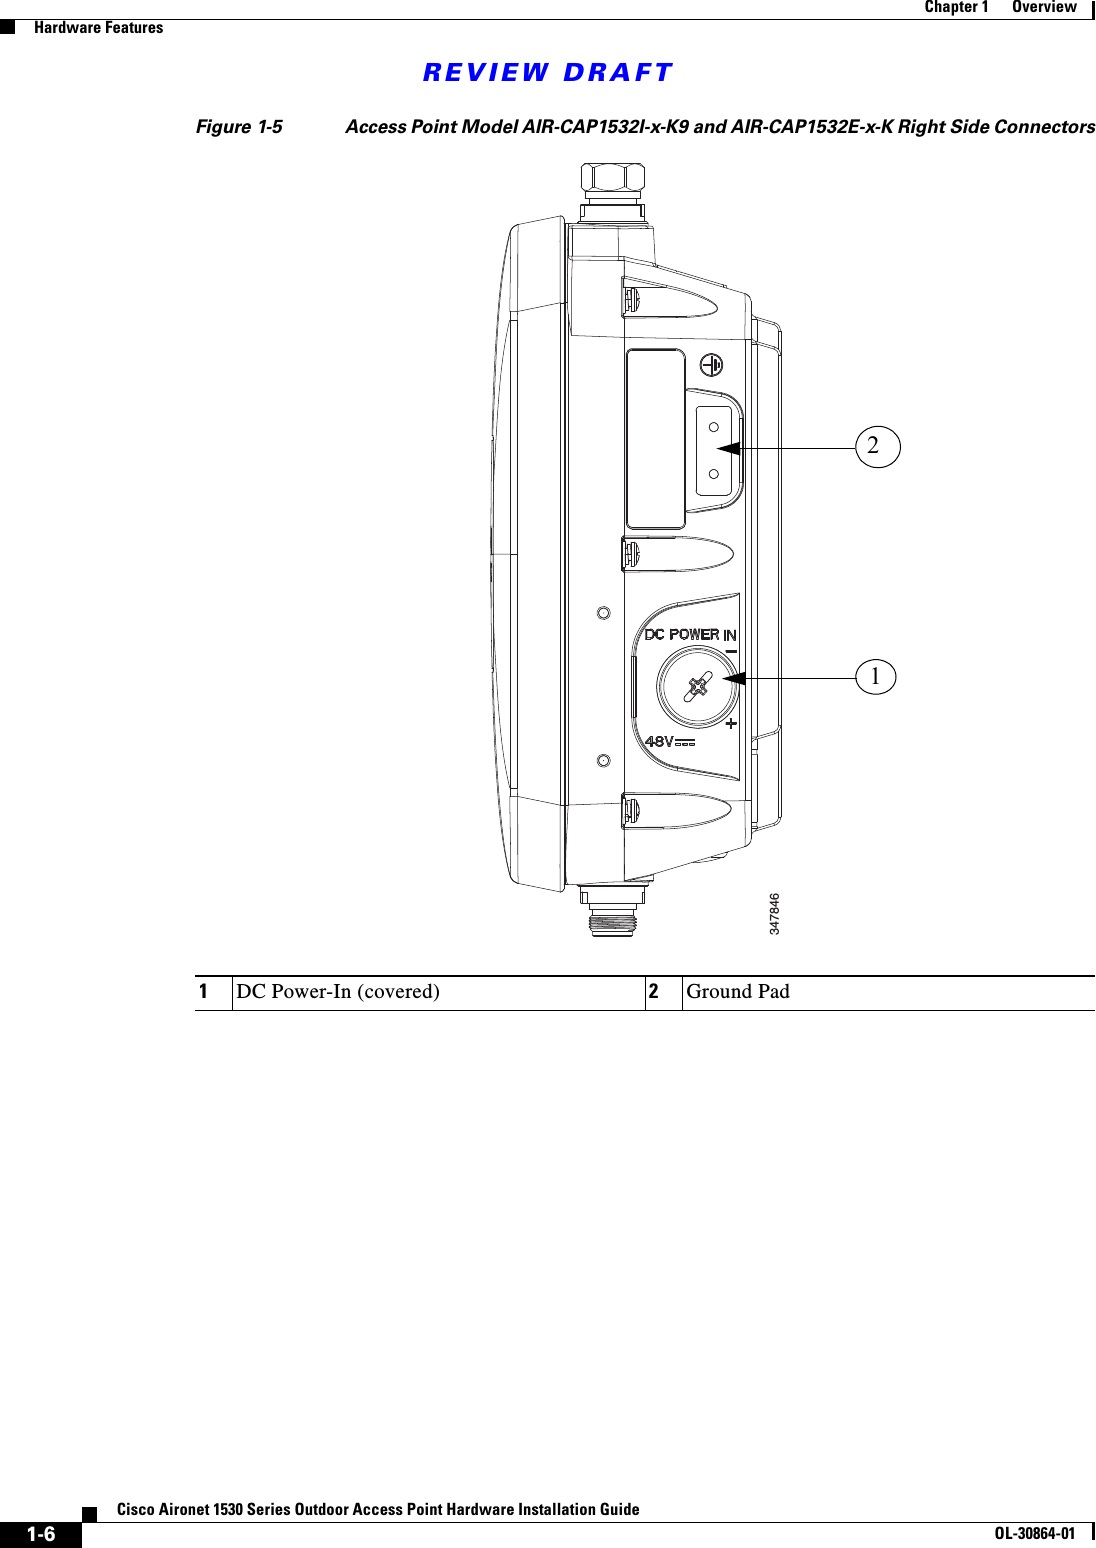 REVIEW DRAFT1-6Cisco Aironet 1530 Series Outdoor Access Point Hardware Installation GuideOL-30864-01Chapter 1      OverviewHardware FeaturesFigure 1-5 Access Point Model AIR-CAP1532I-x-K9 and AIR-CAP1532E-x-K Right Side Connectors1DC Power-In (covered) 2Ground Pad34784612